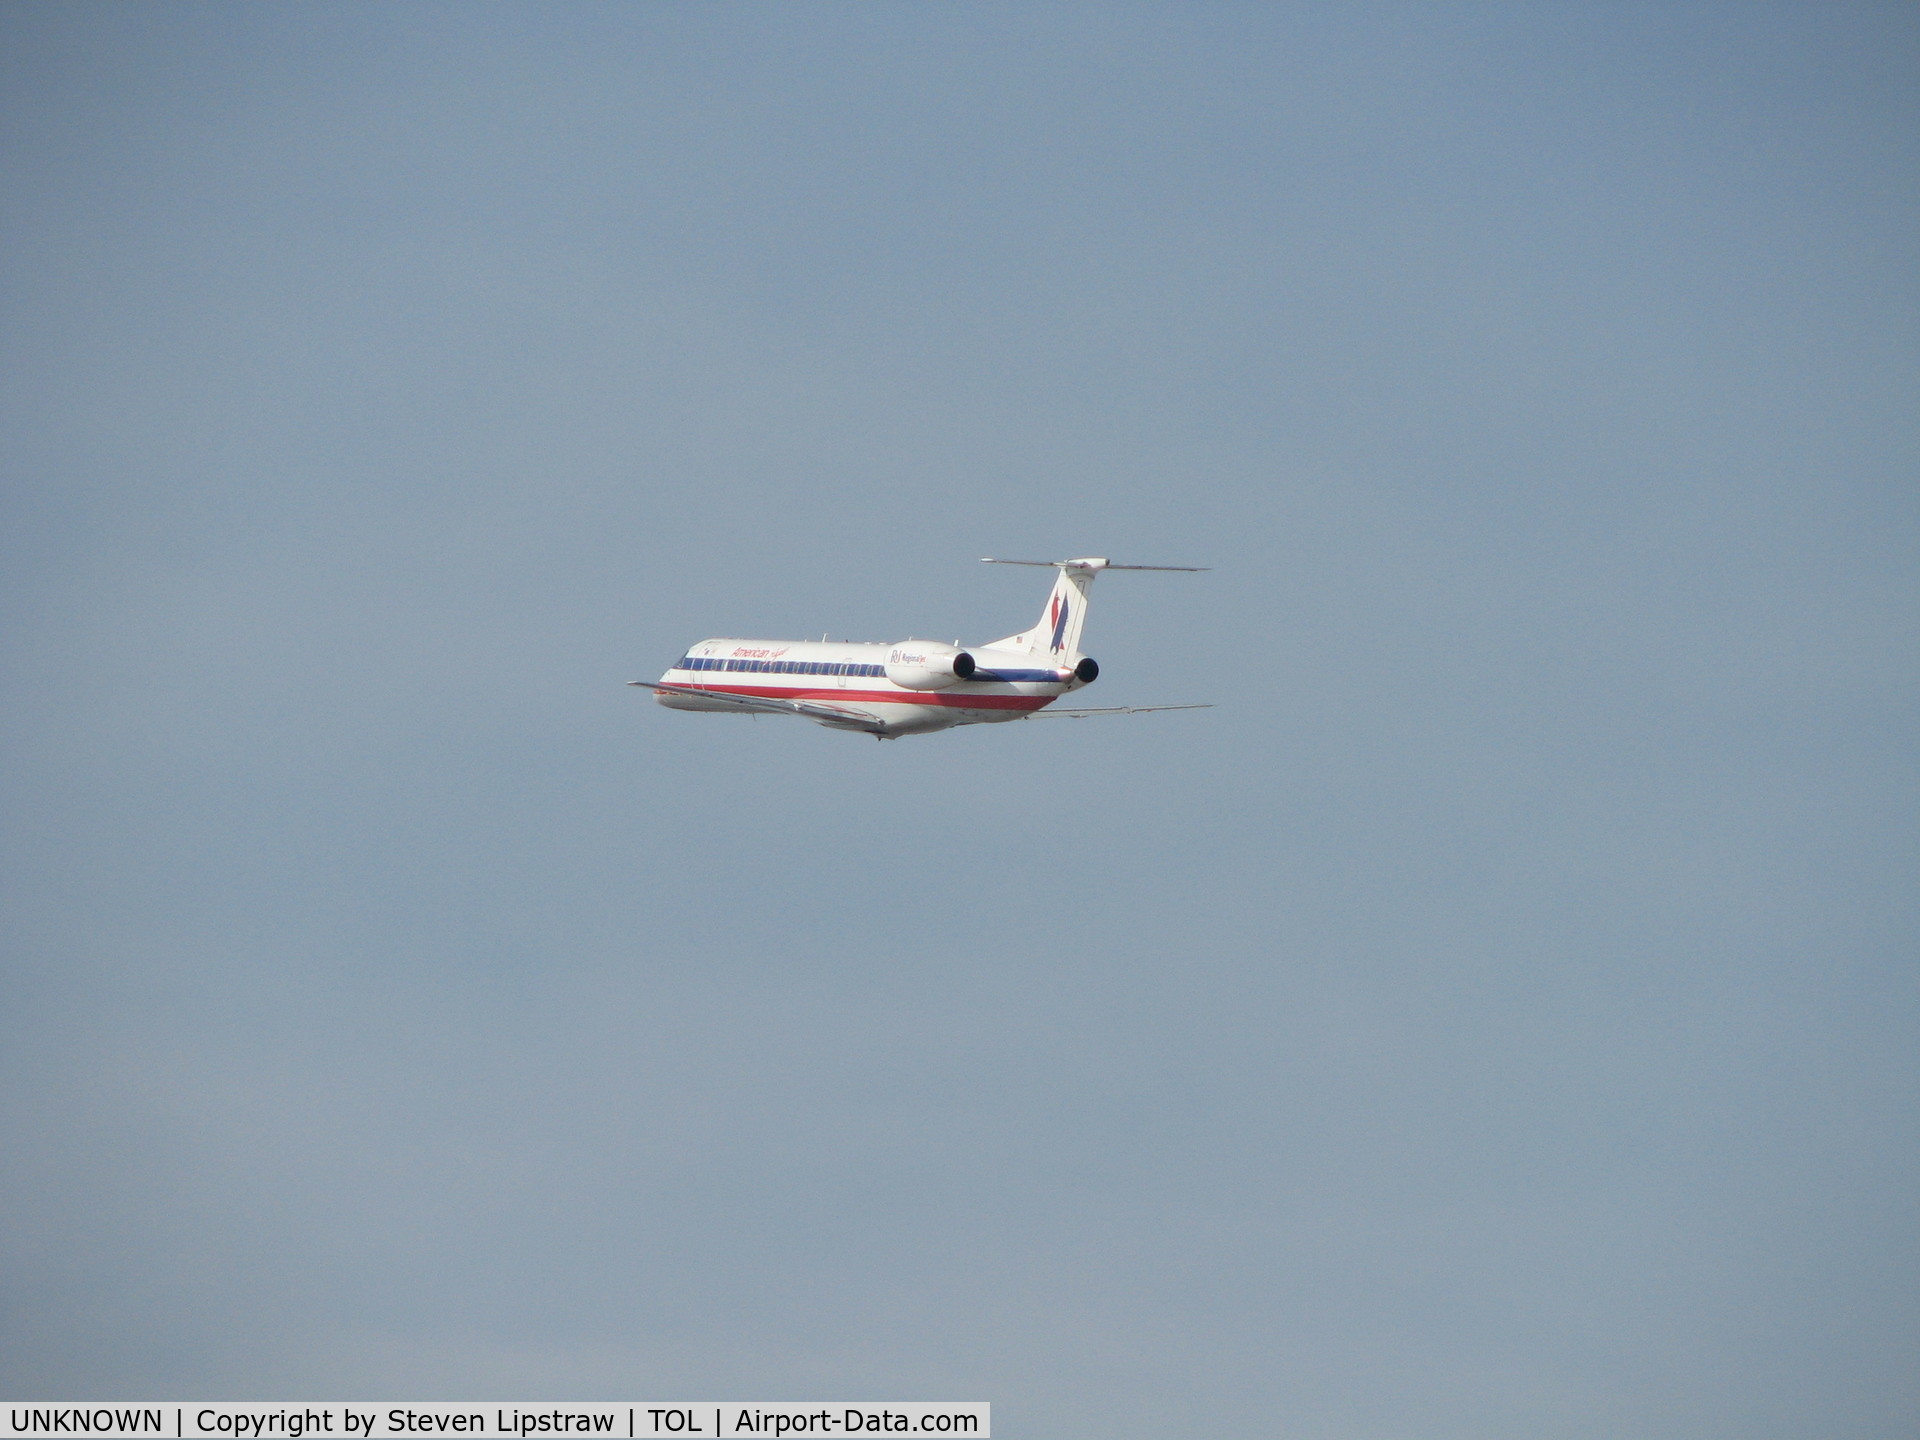 UNKNOWN, Airliners Various C/N Unknown, American Eagle Erj-145 climbing out